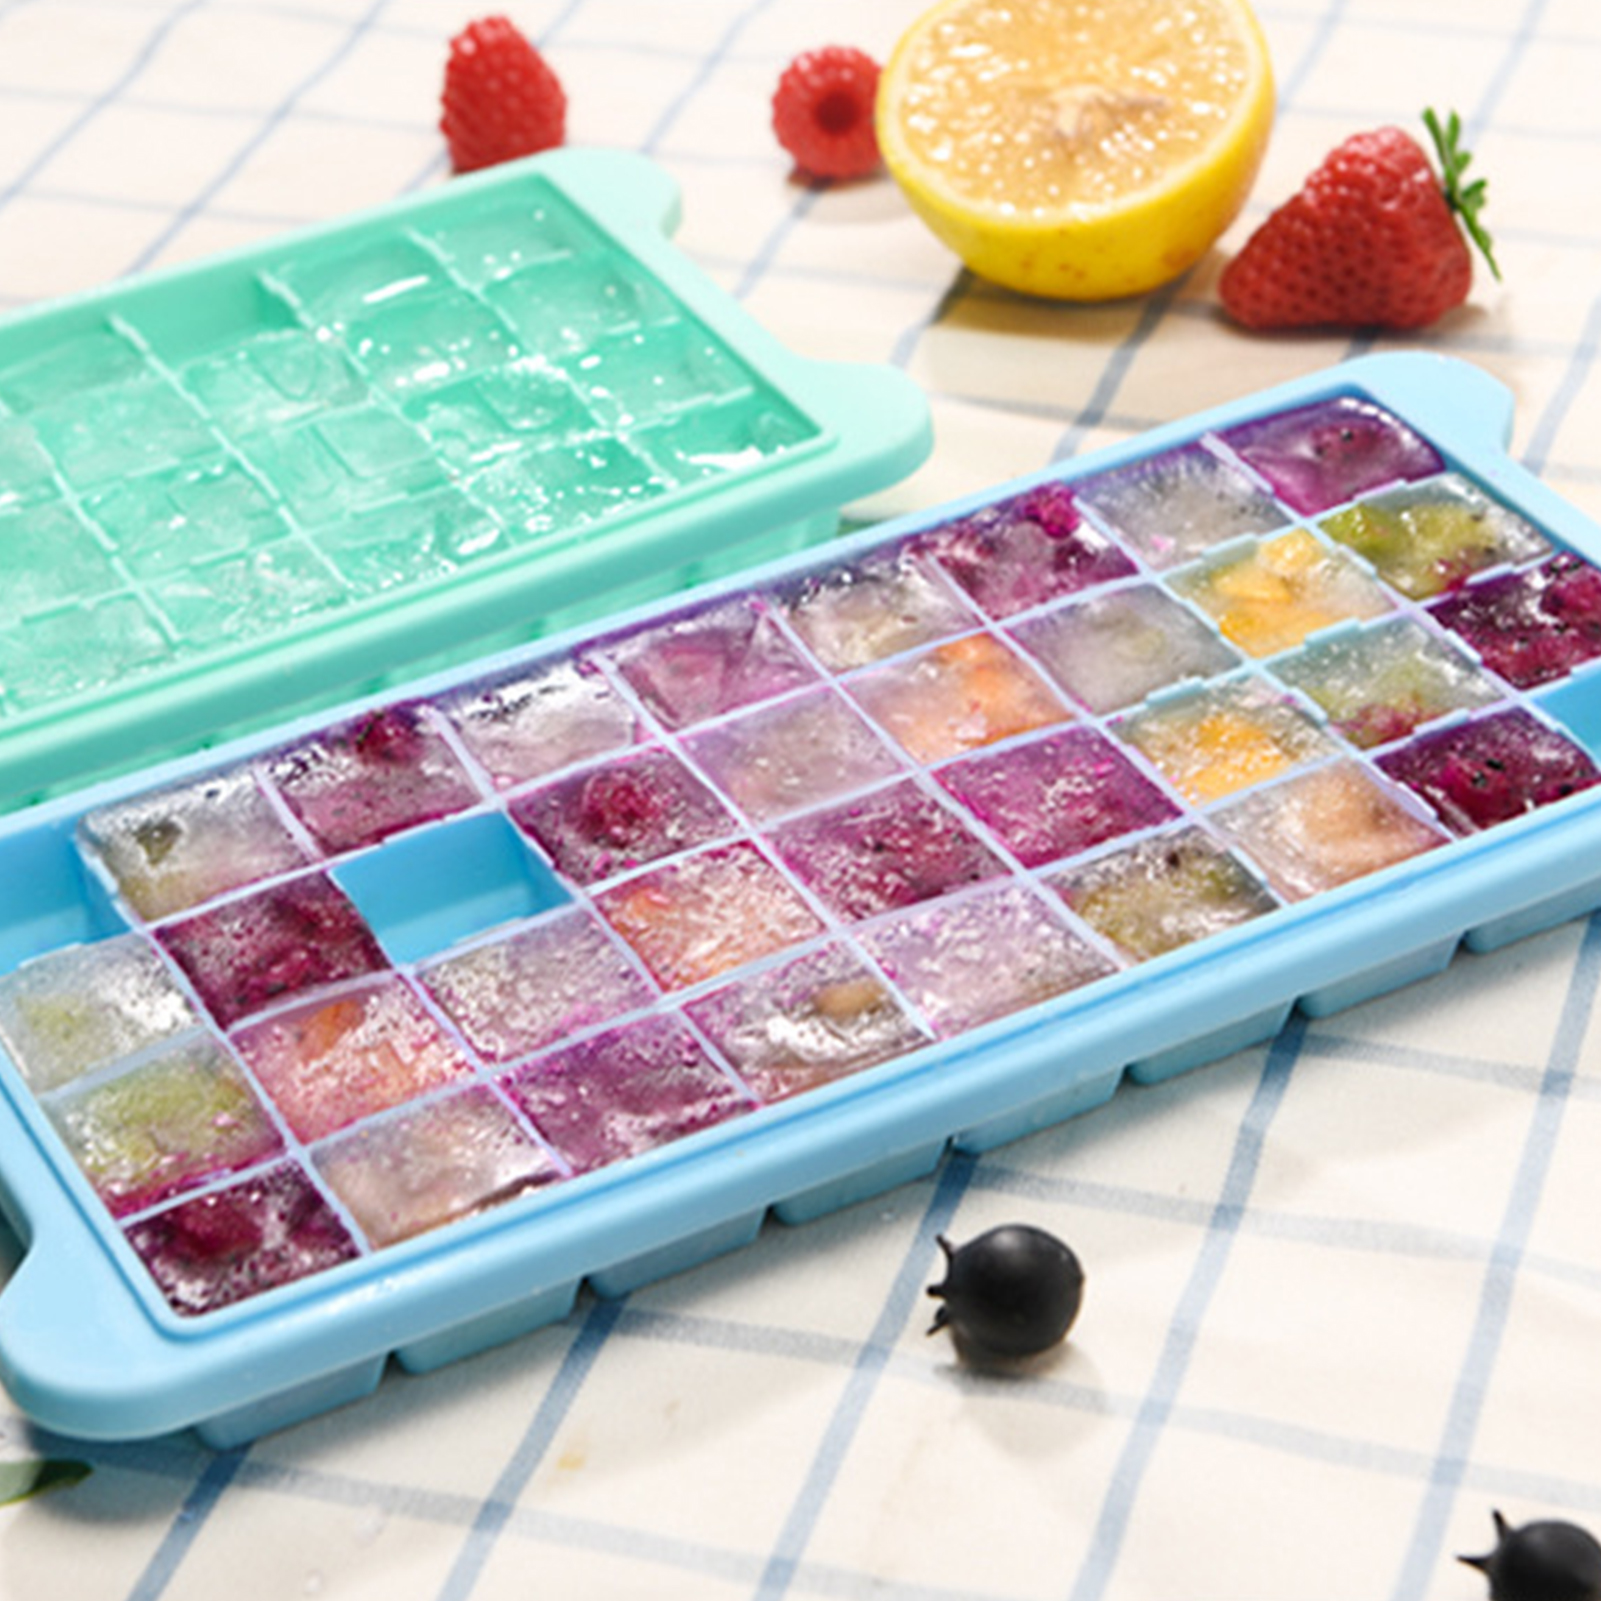 Ice Cube Trays,Ice Tray Food Grade Flexible Silicone Ice Cube Tray Molds with Lids, Easy Release Ice Trays Make 24/36 Ice Cube, Stackable Dishwasher Safe - image 3 of 8